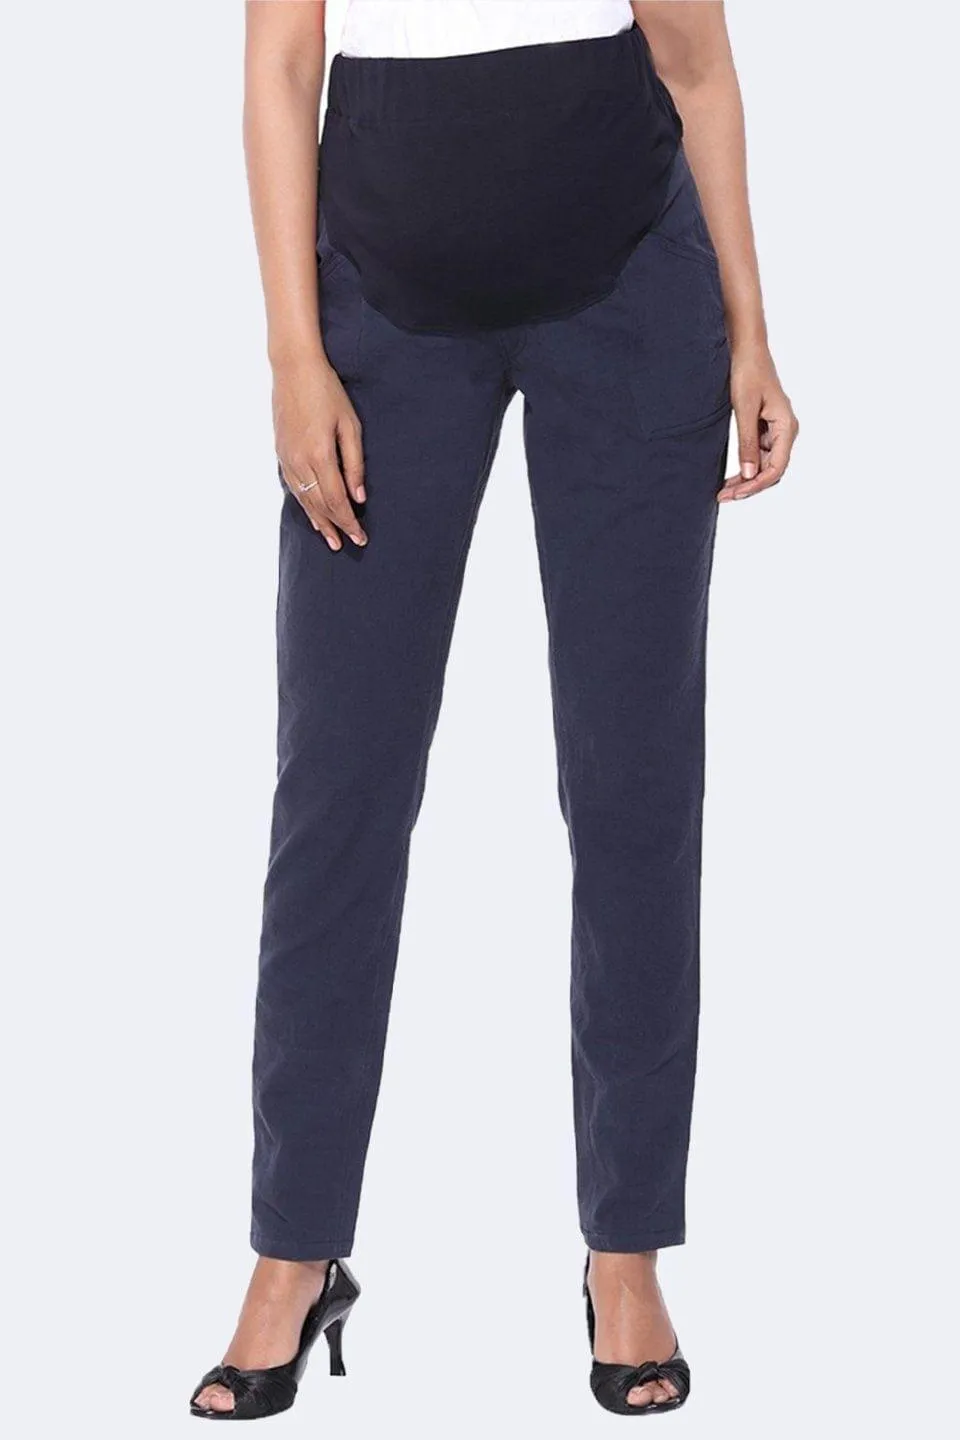 Navy Blue Maternity Trousers  Seraphine